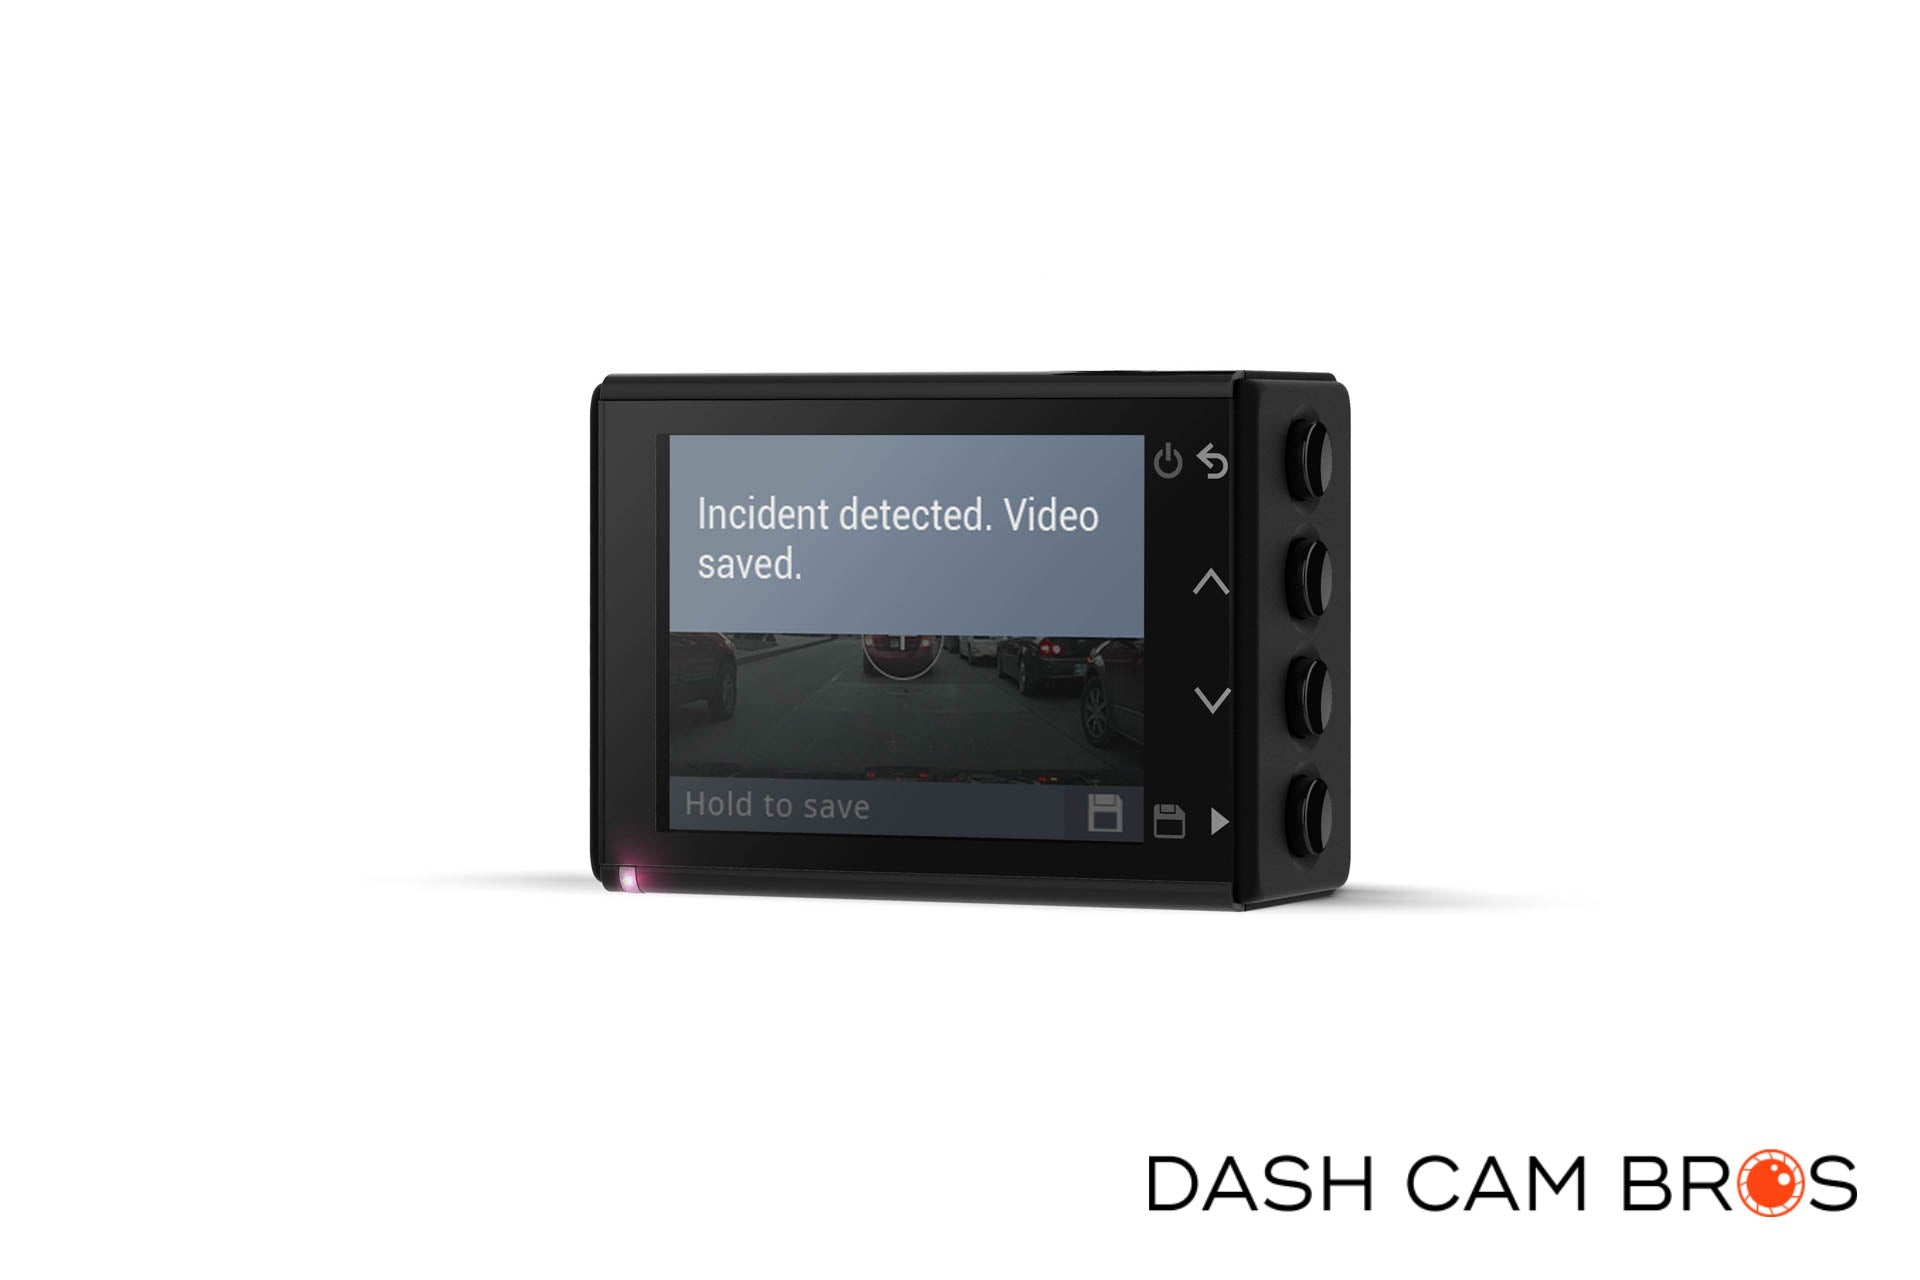 Full Review with Footage, GARMIN 67W Dash Cam (2022)